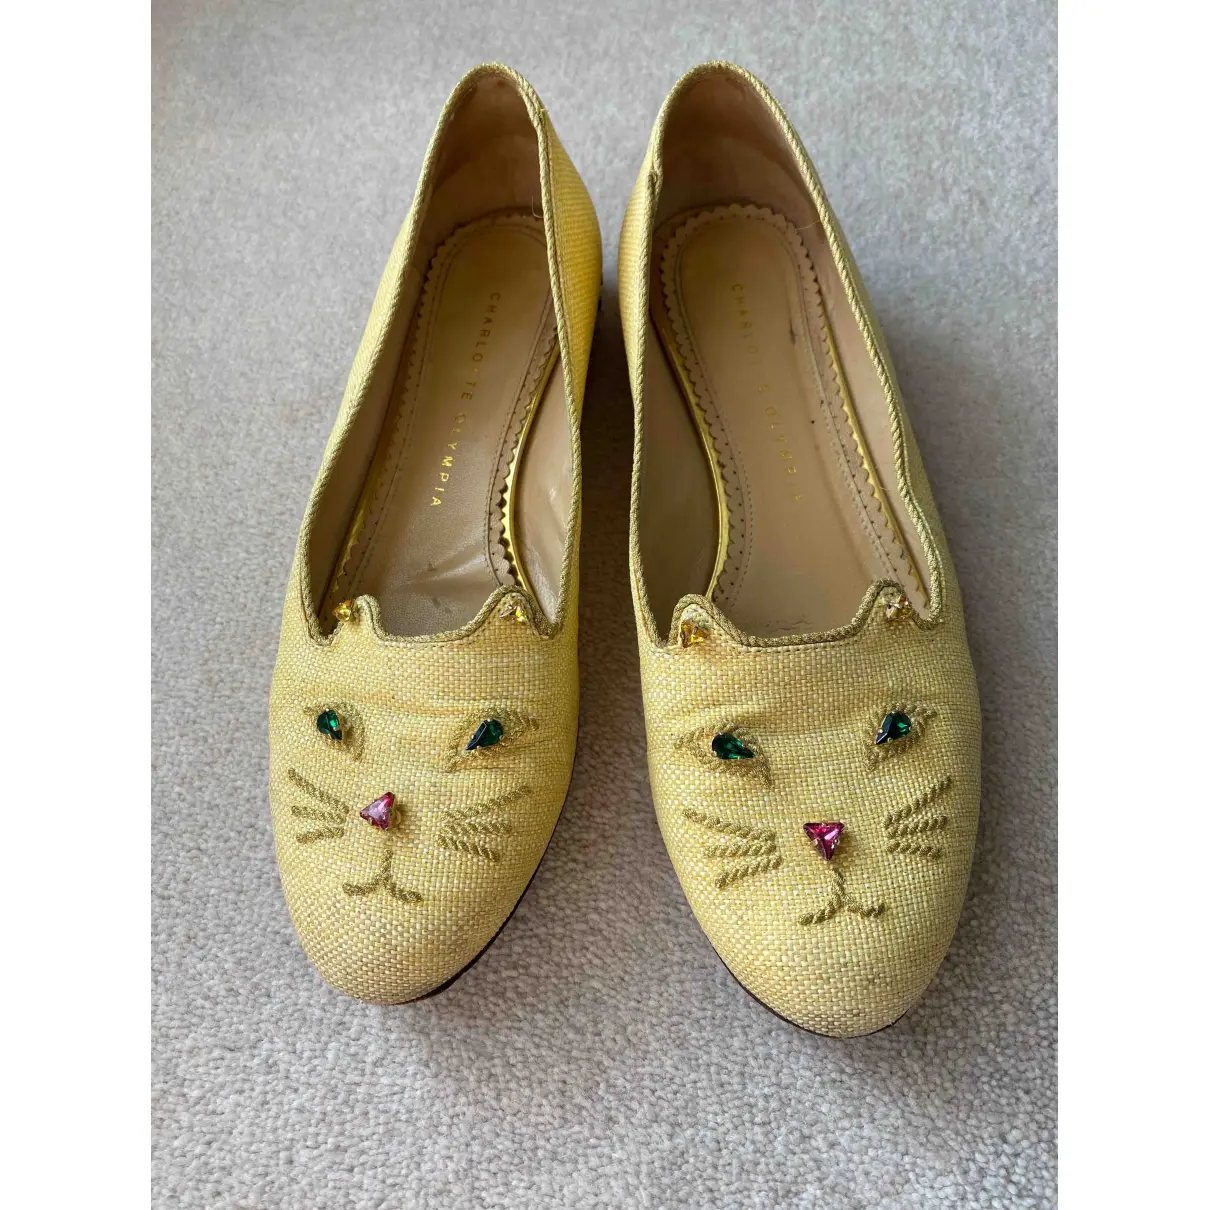 Buy Charlotte Olympia Kitty cloth ballet flats online